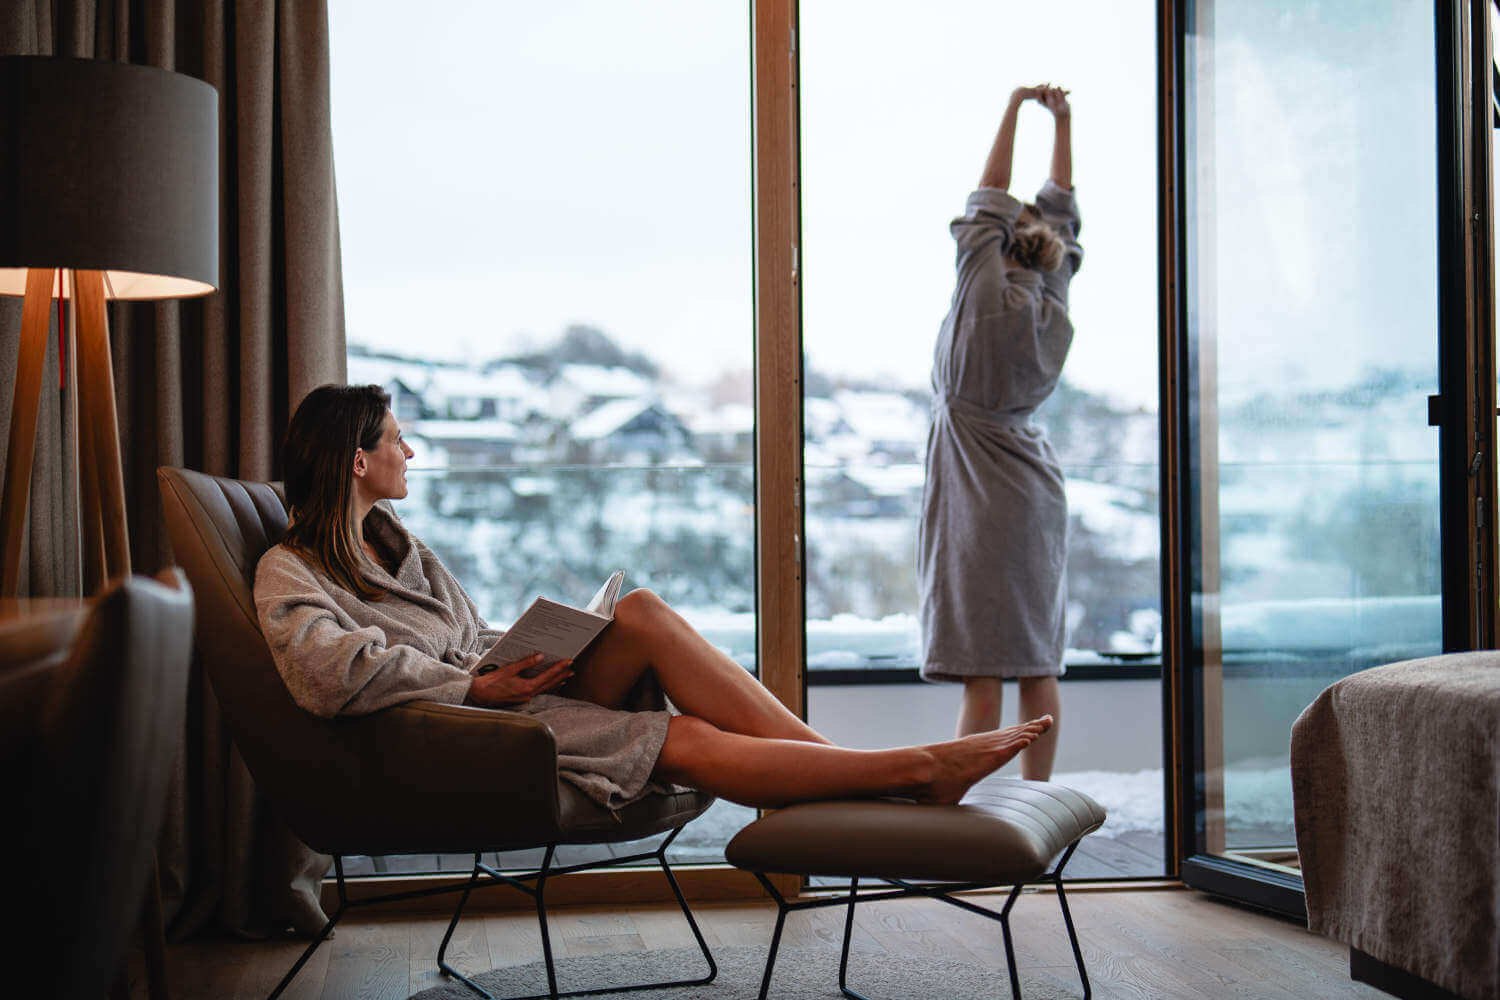 A woman in a bathrobe stands on her room balcony in winter and stretches out with pleasure at the Wellnesshotel Sauerland